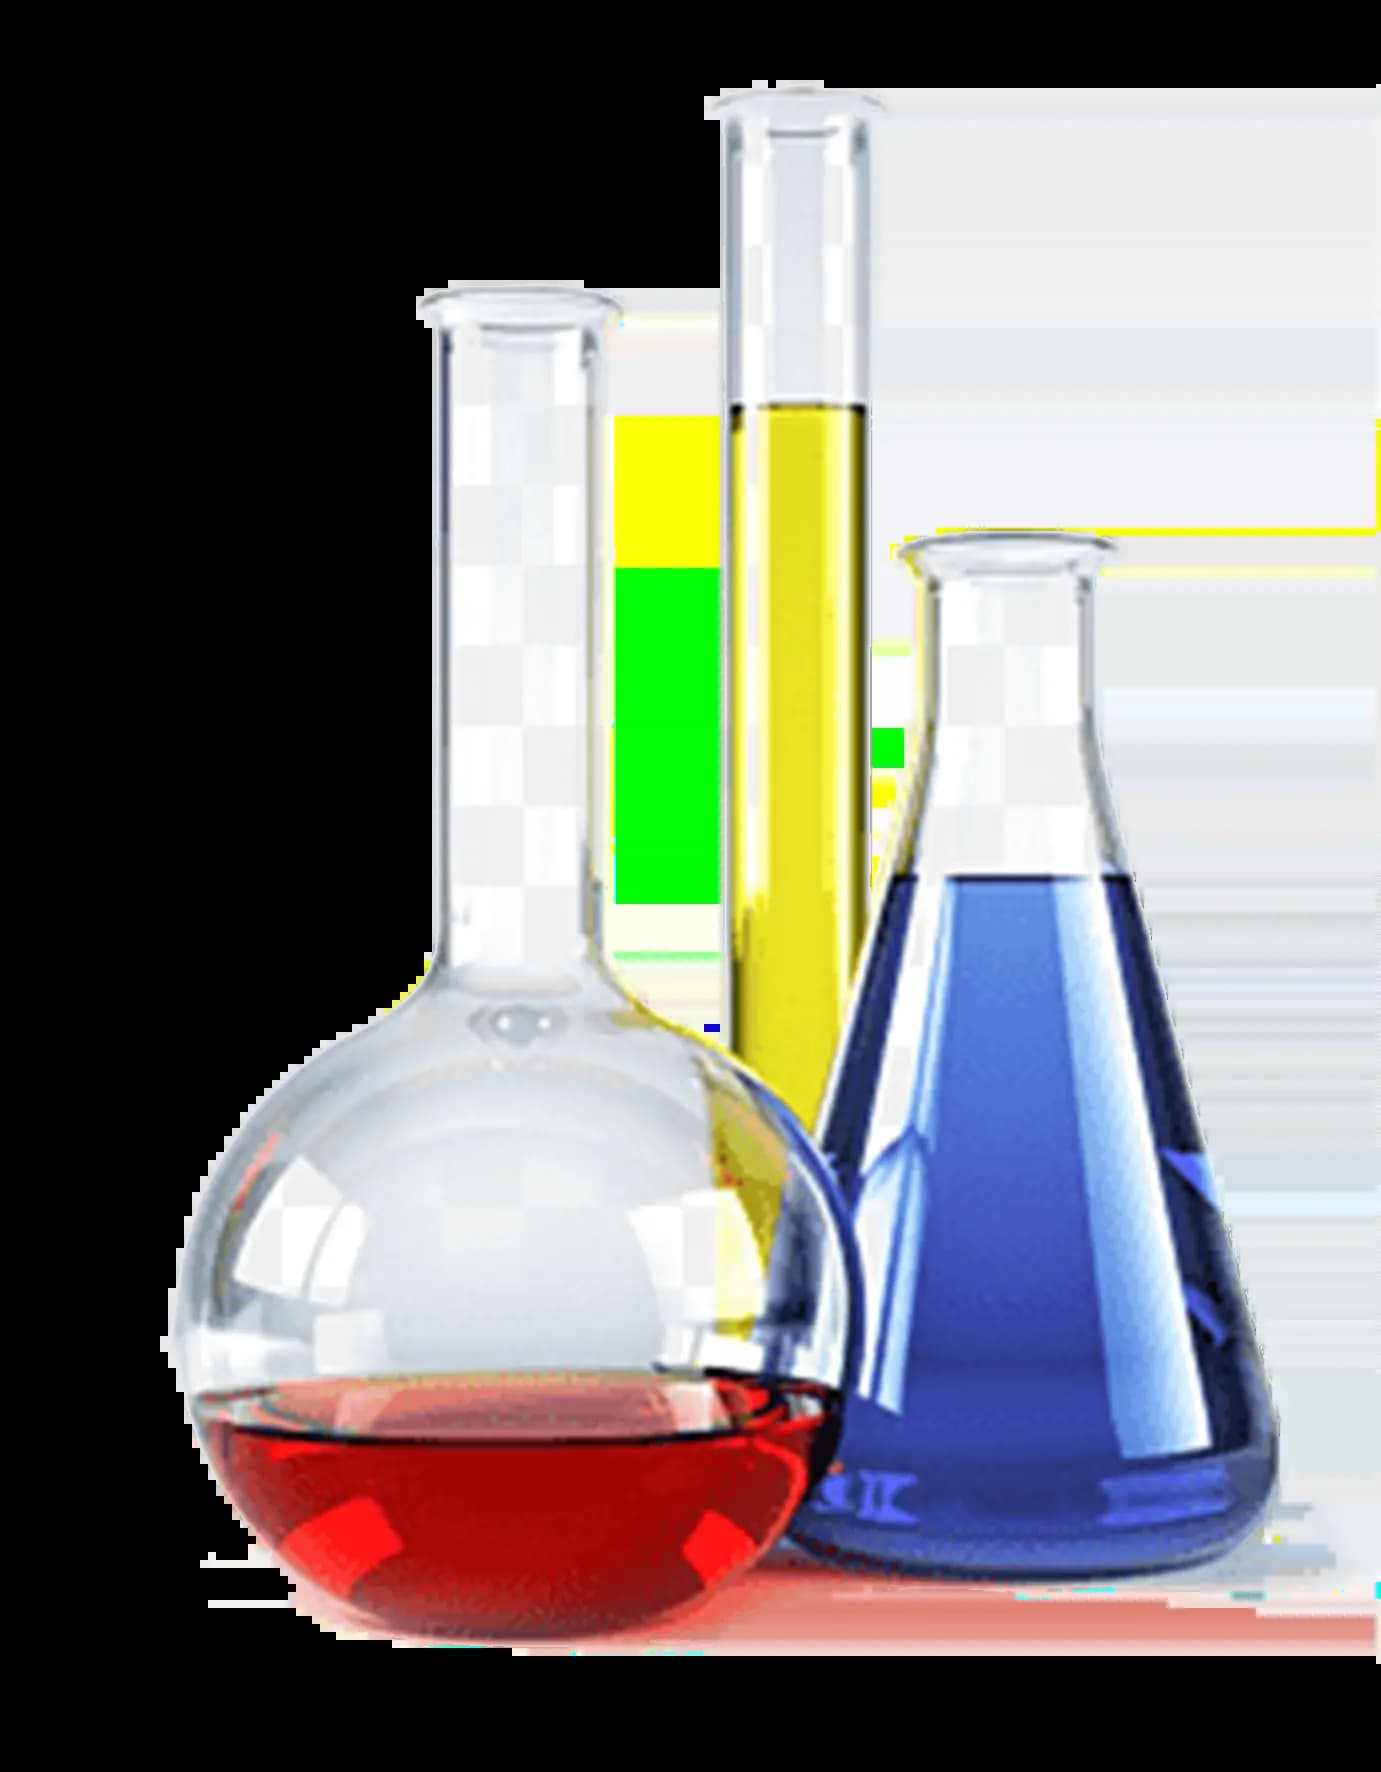 Speciality Chemicals consultants